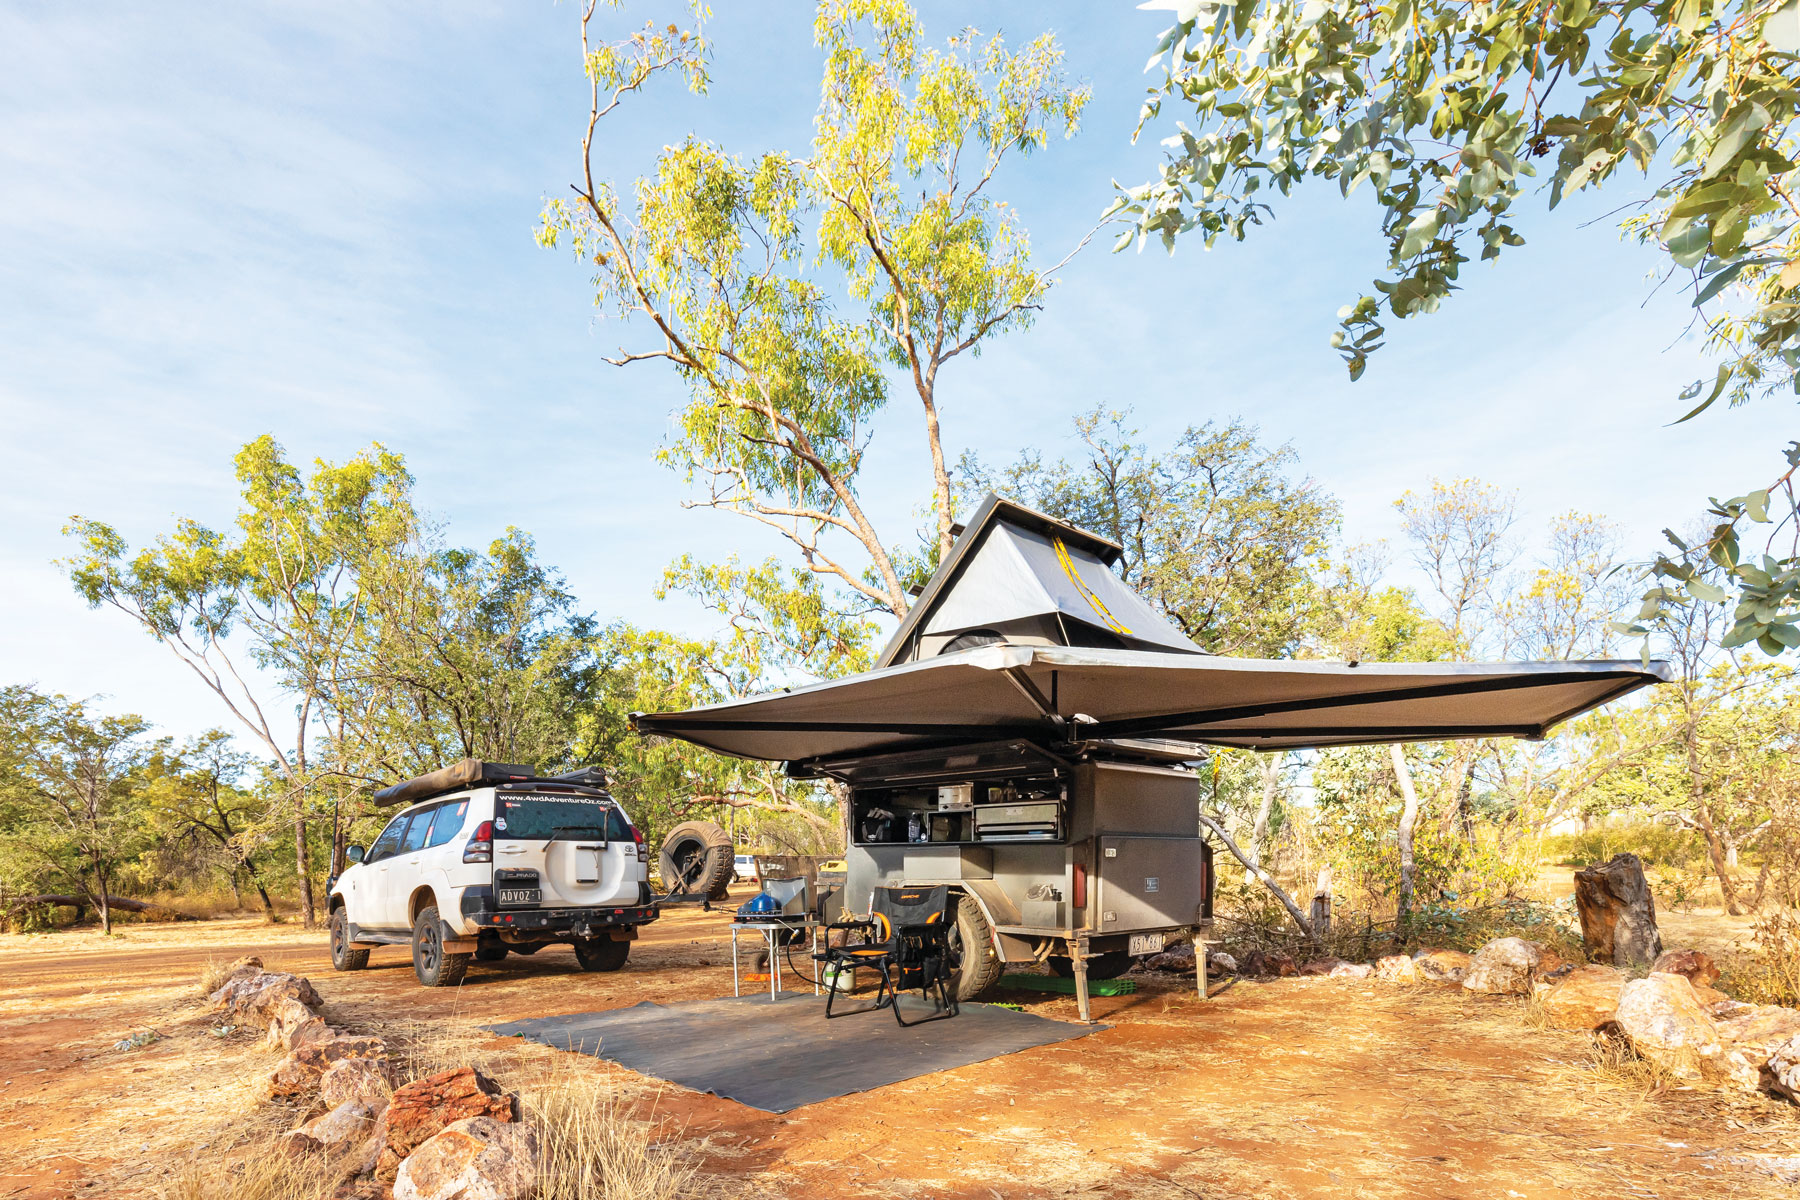 An awning on your camper will provide shade and protection from the rain